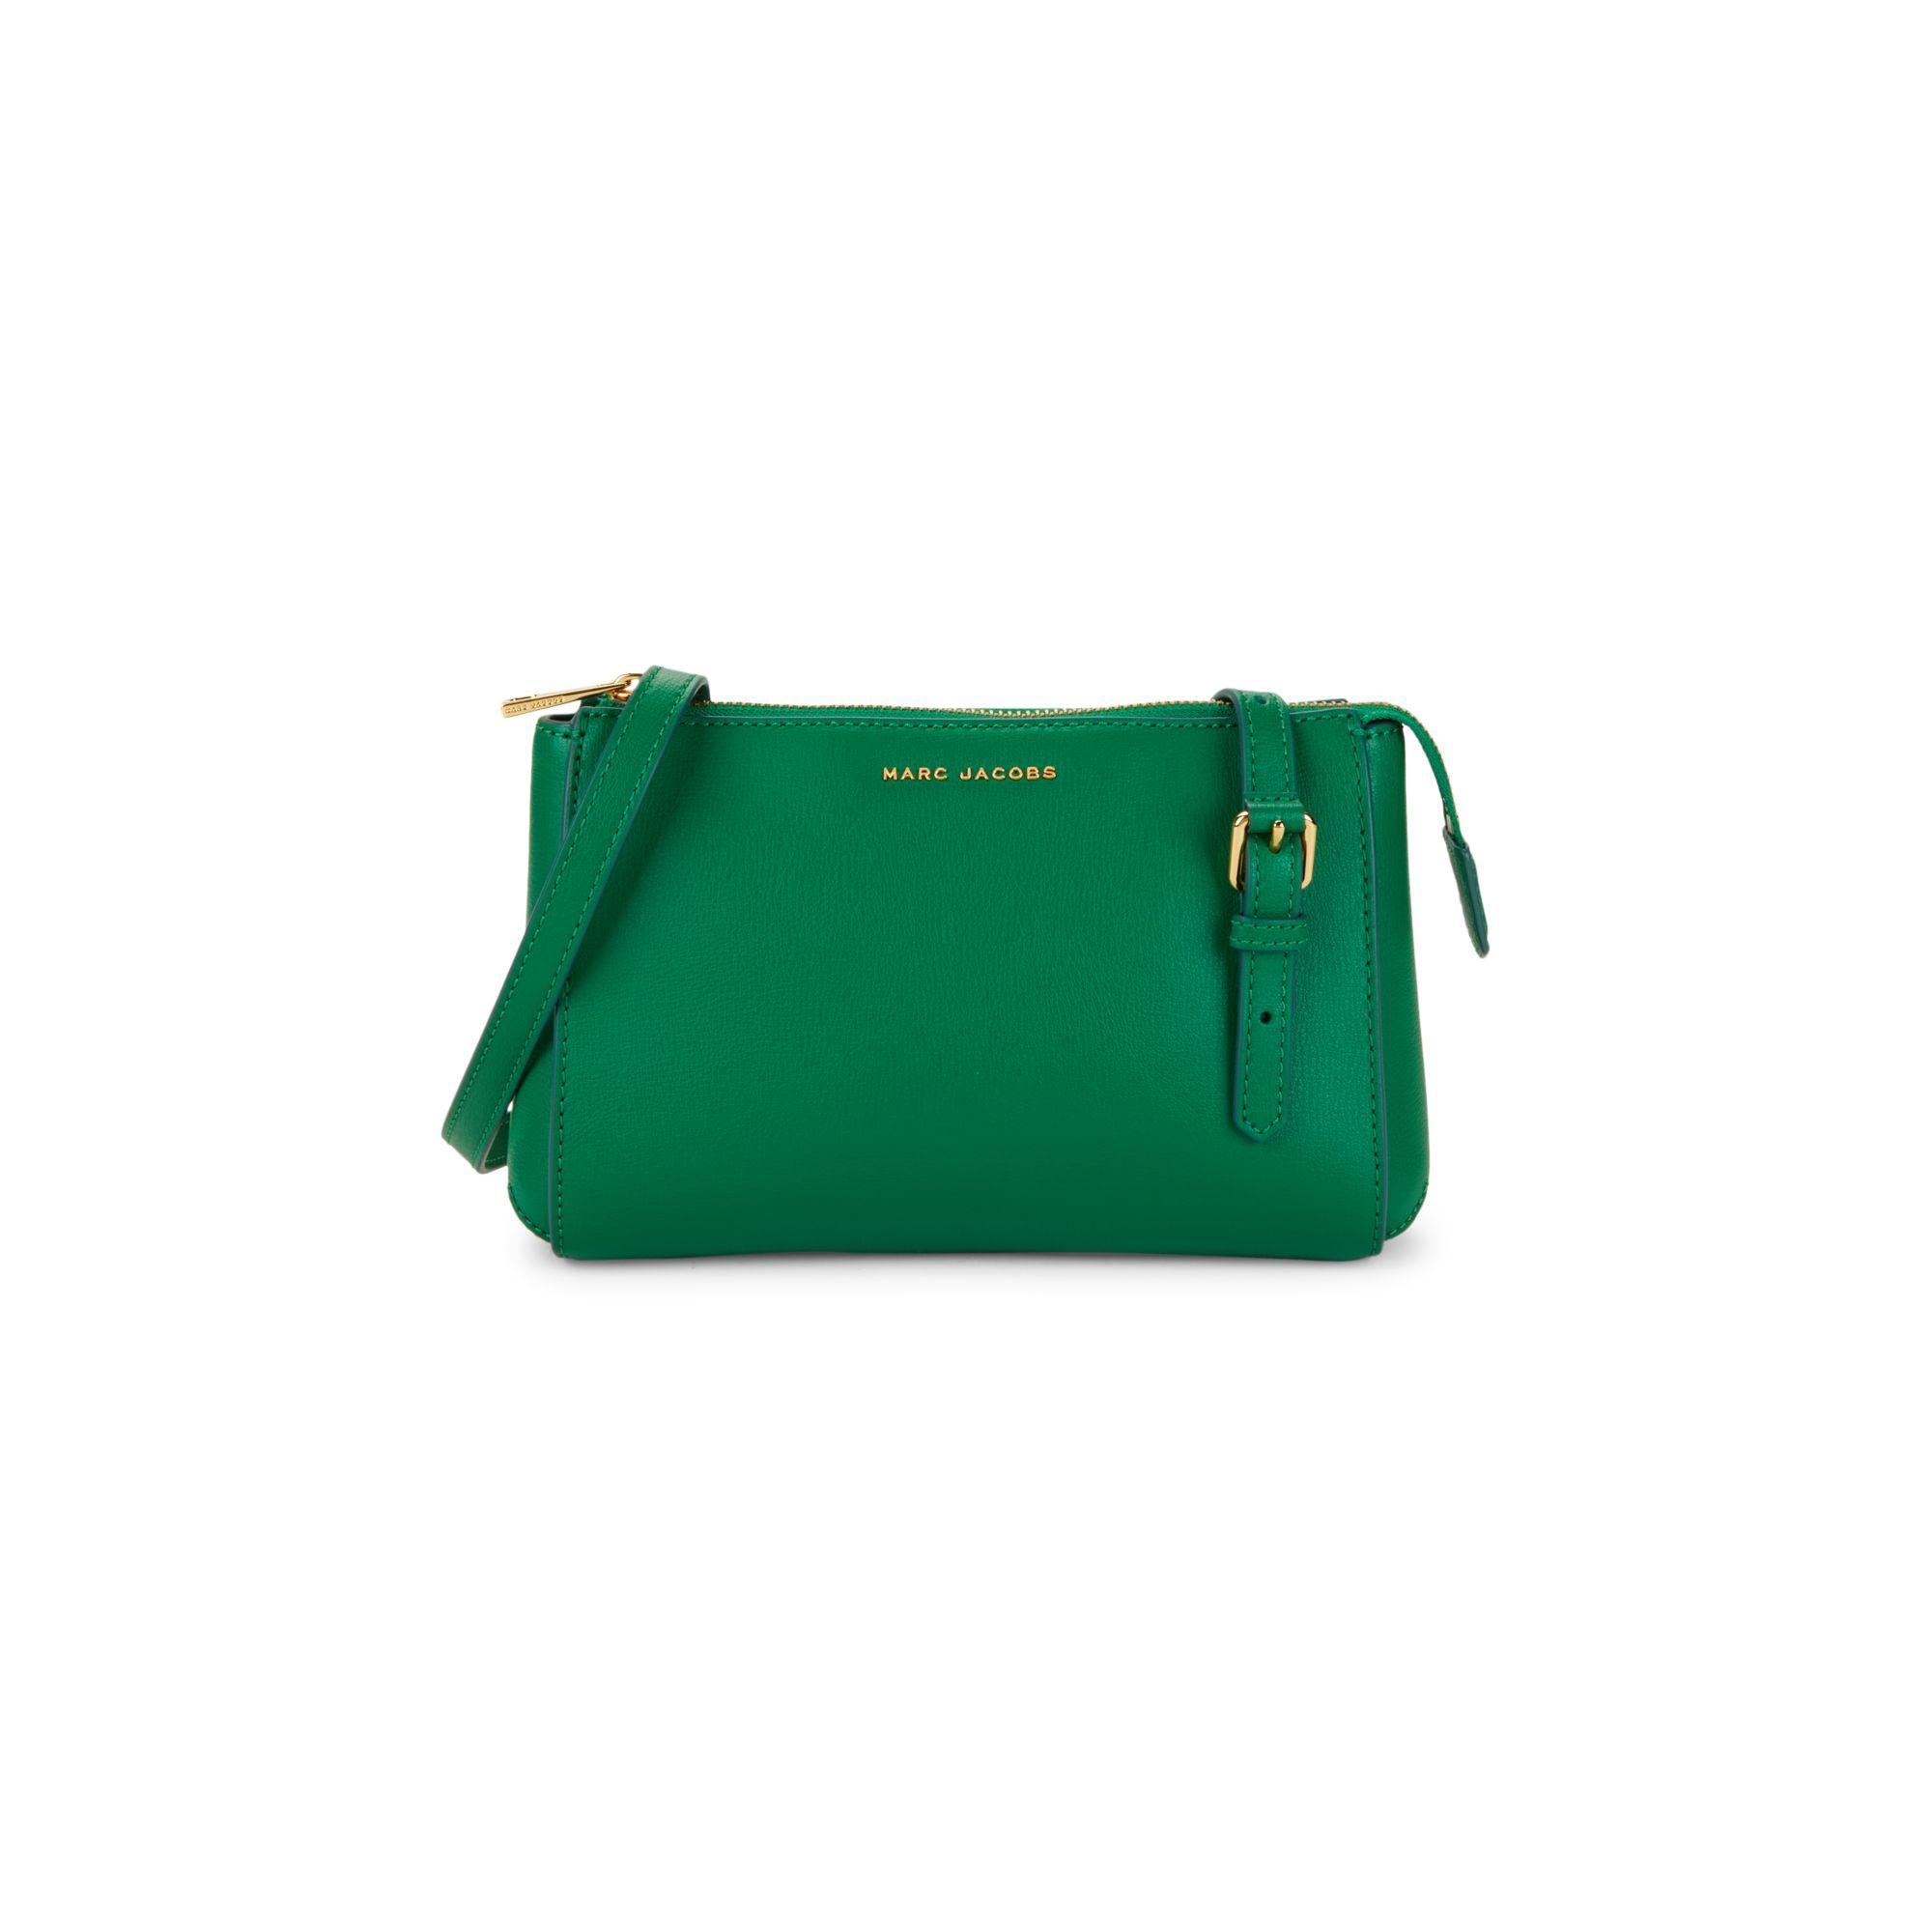 Marc Jacobs Pepper Leather Crossbody Bag in Green | Lyst Canada